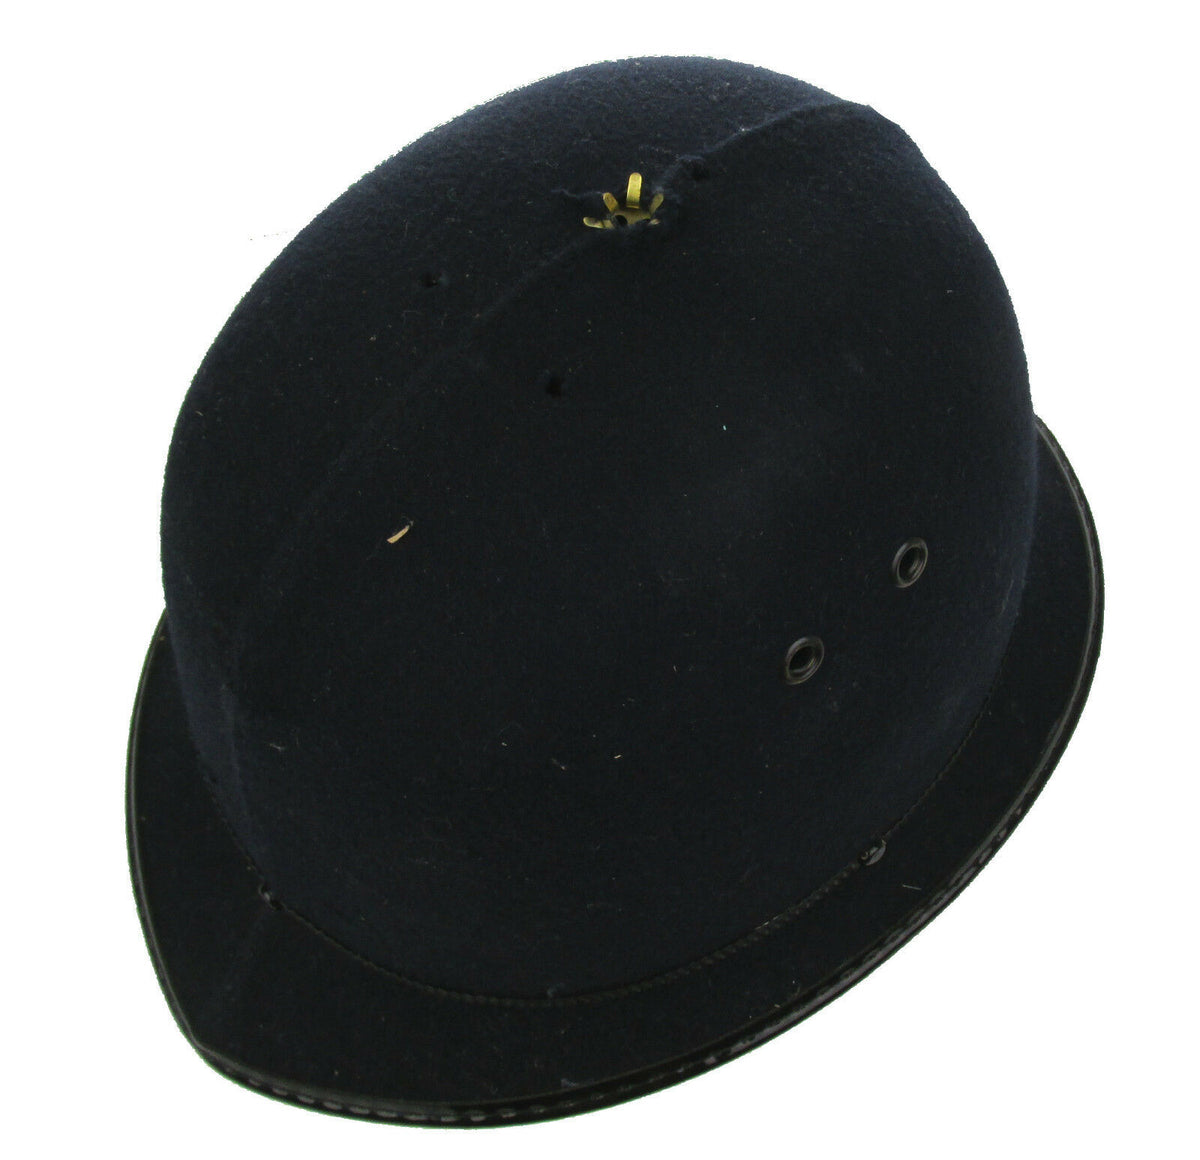 British Bobby Hat without Insignia - Authentic - Amazing Low Price!